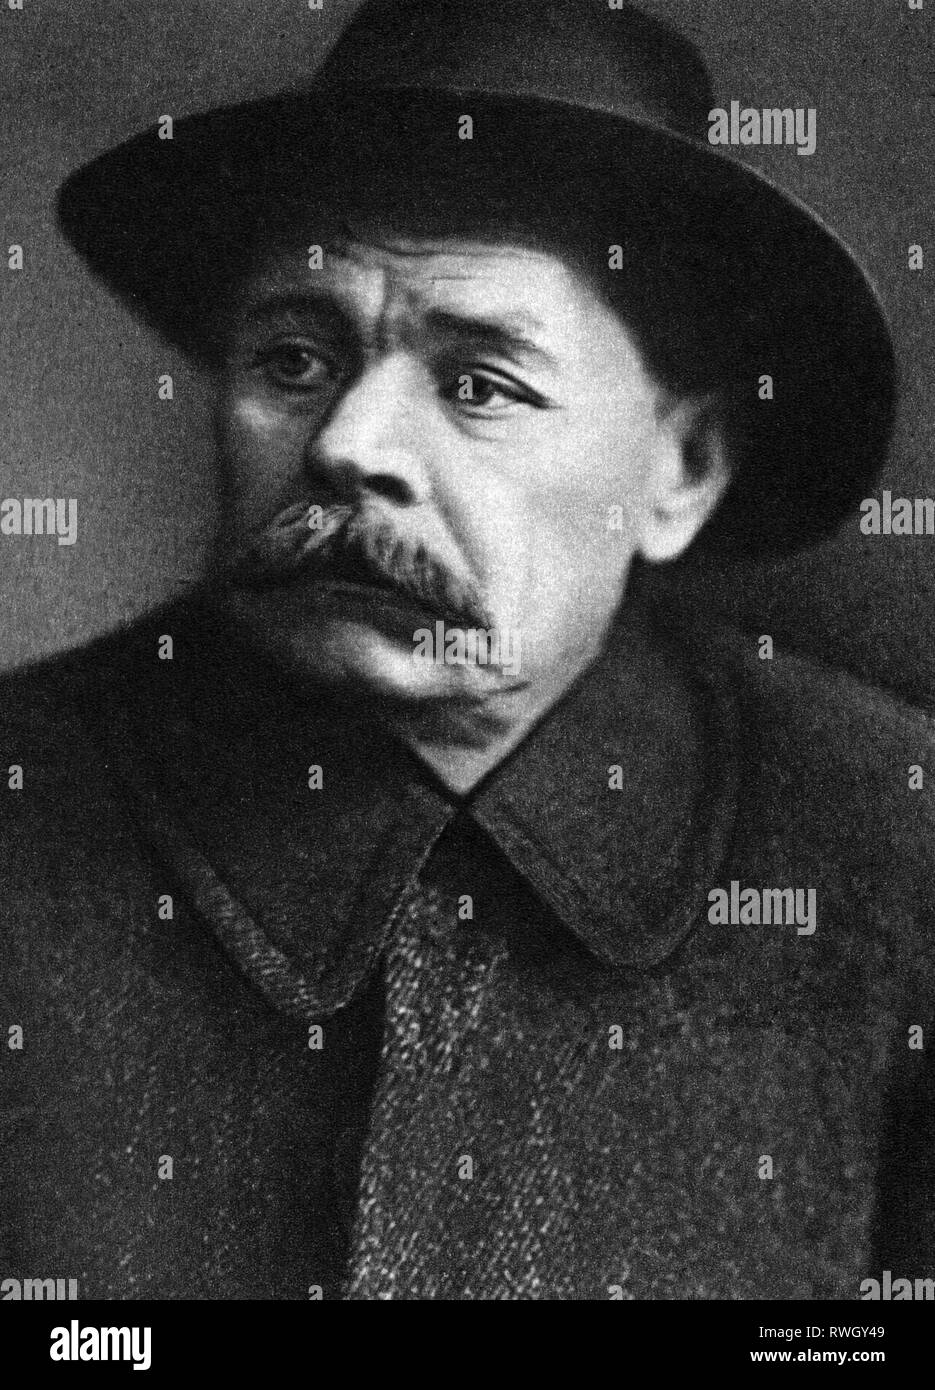 Gorky, Maxim, 28.3.1868 - 18.6.1936, Russian author / writer, portrait, 1922, Additional-Rights-Clearance-Info-Not-Available Stock Photo